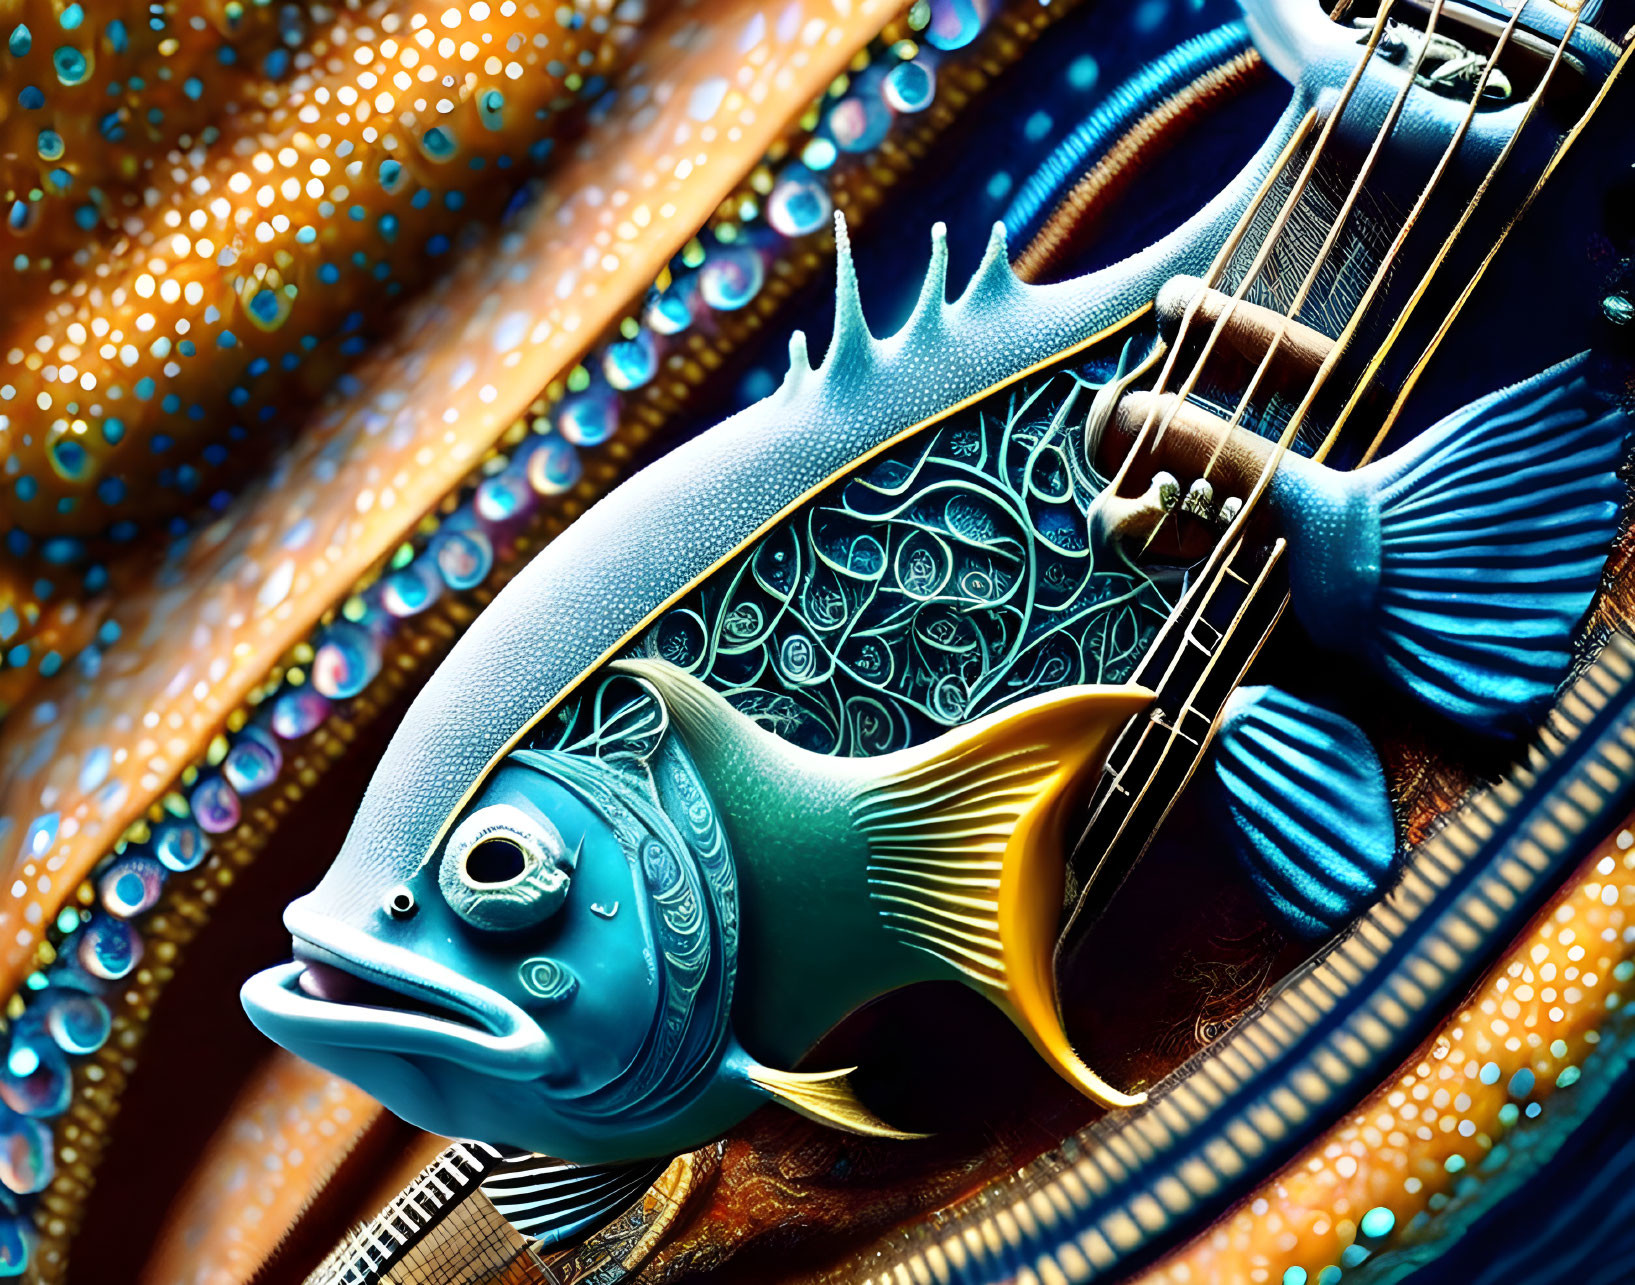 Colorful Fish and Guitar Artwork on Textured Background